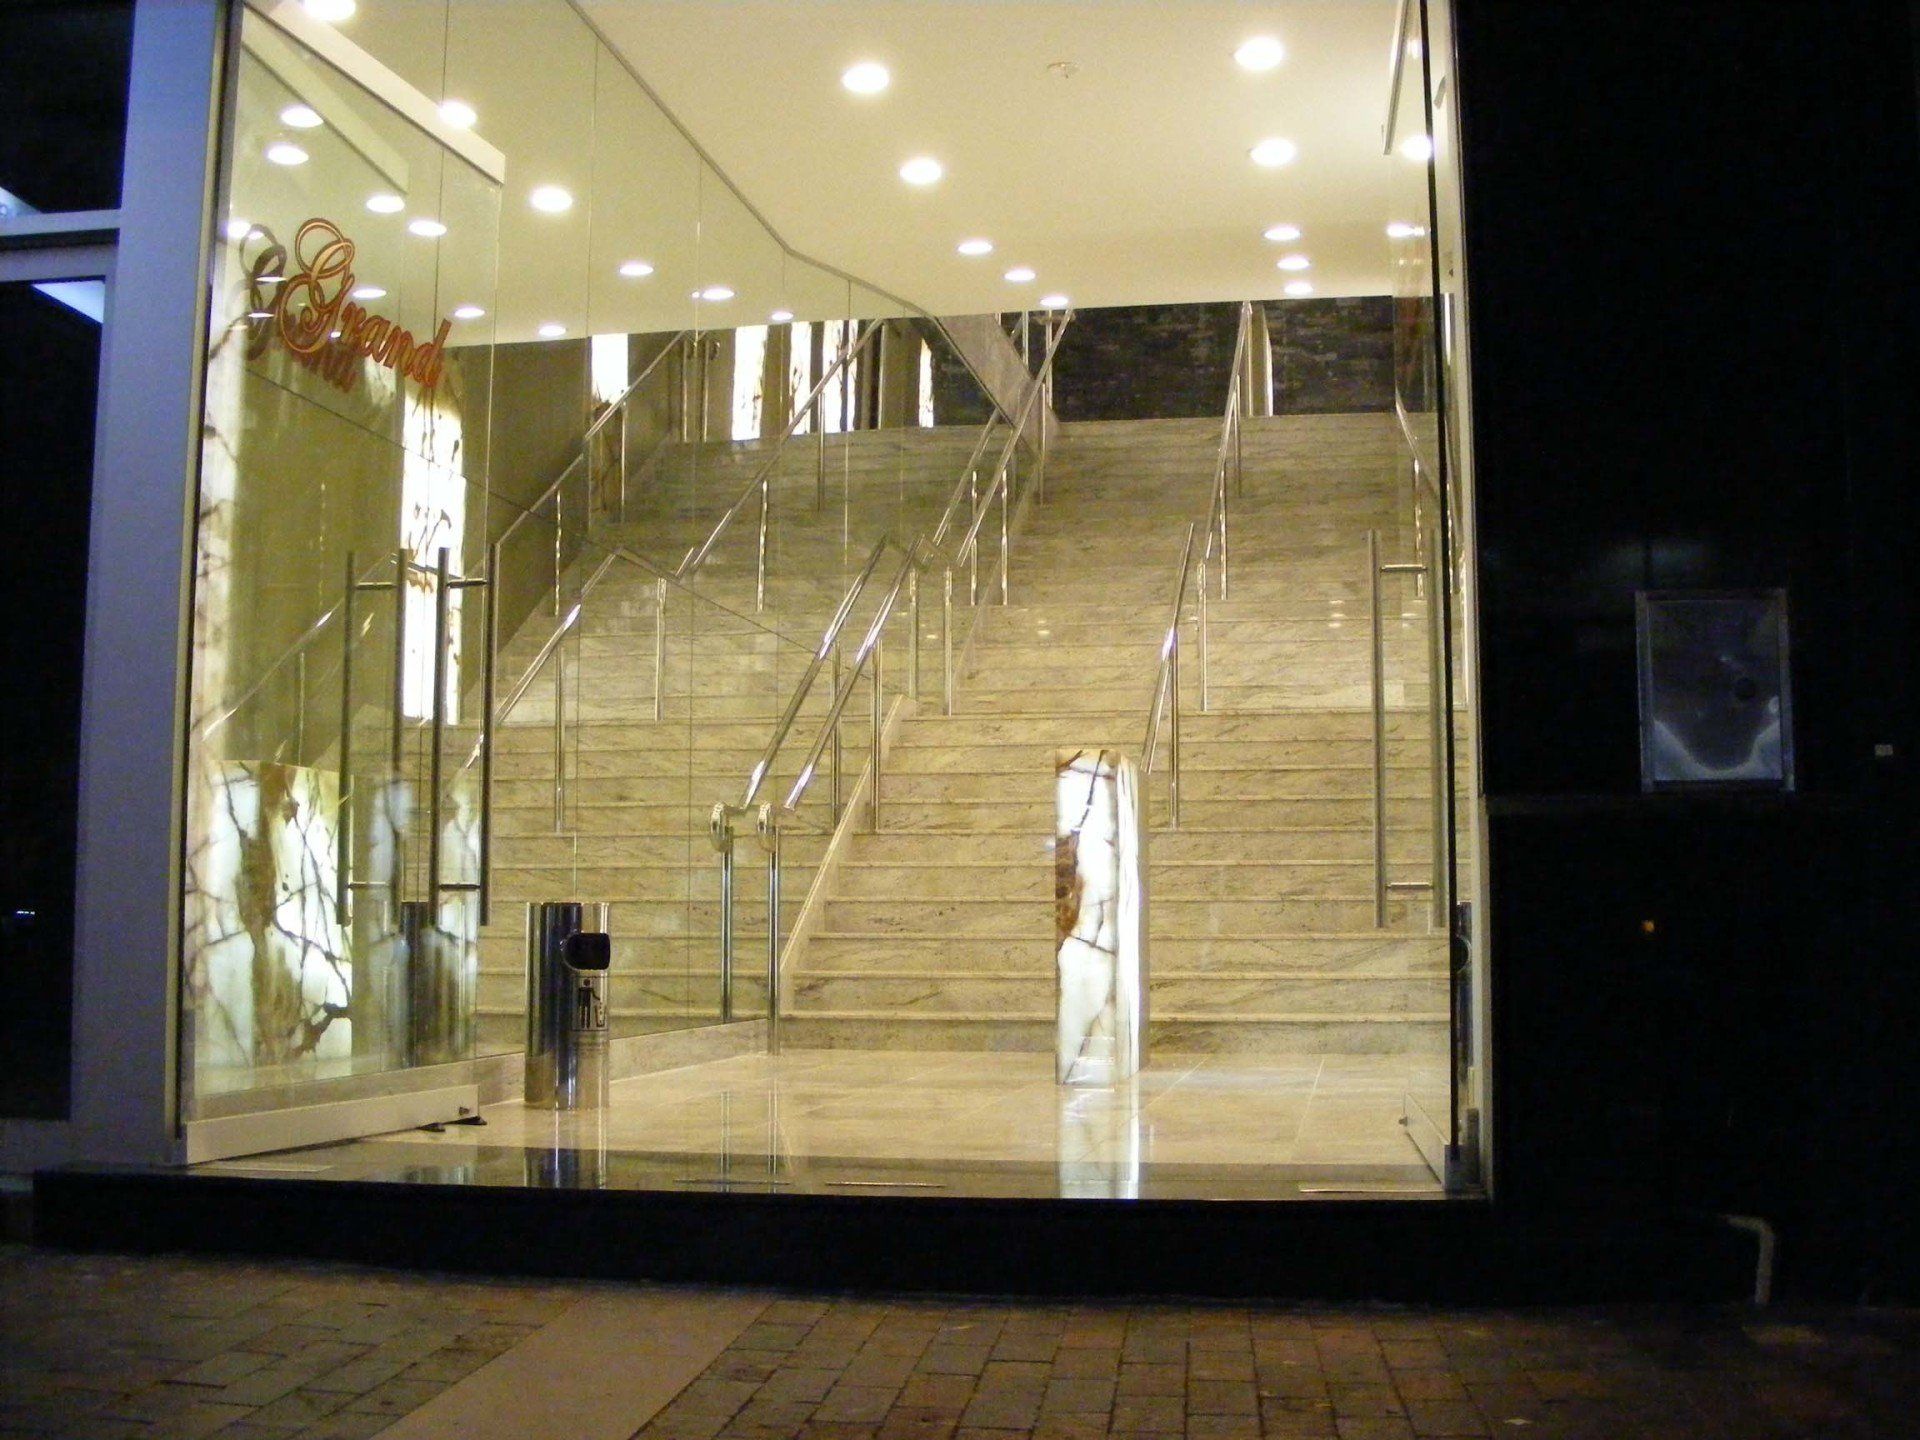 New function centre entrance